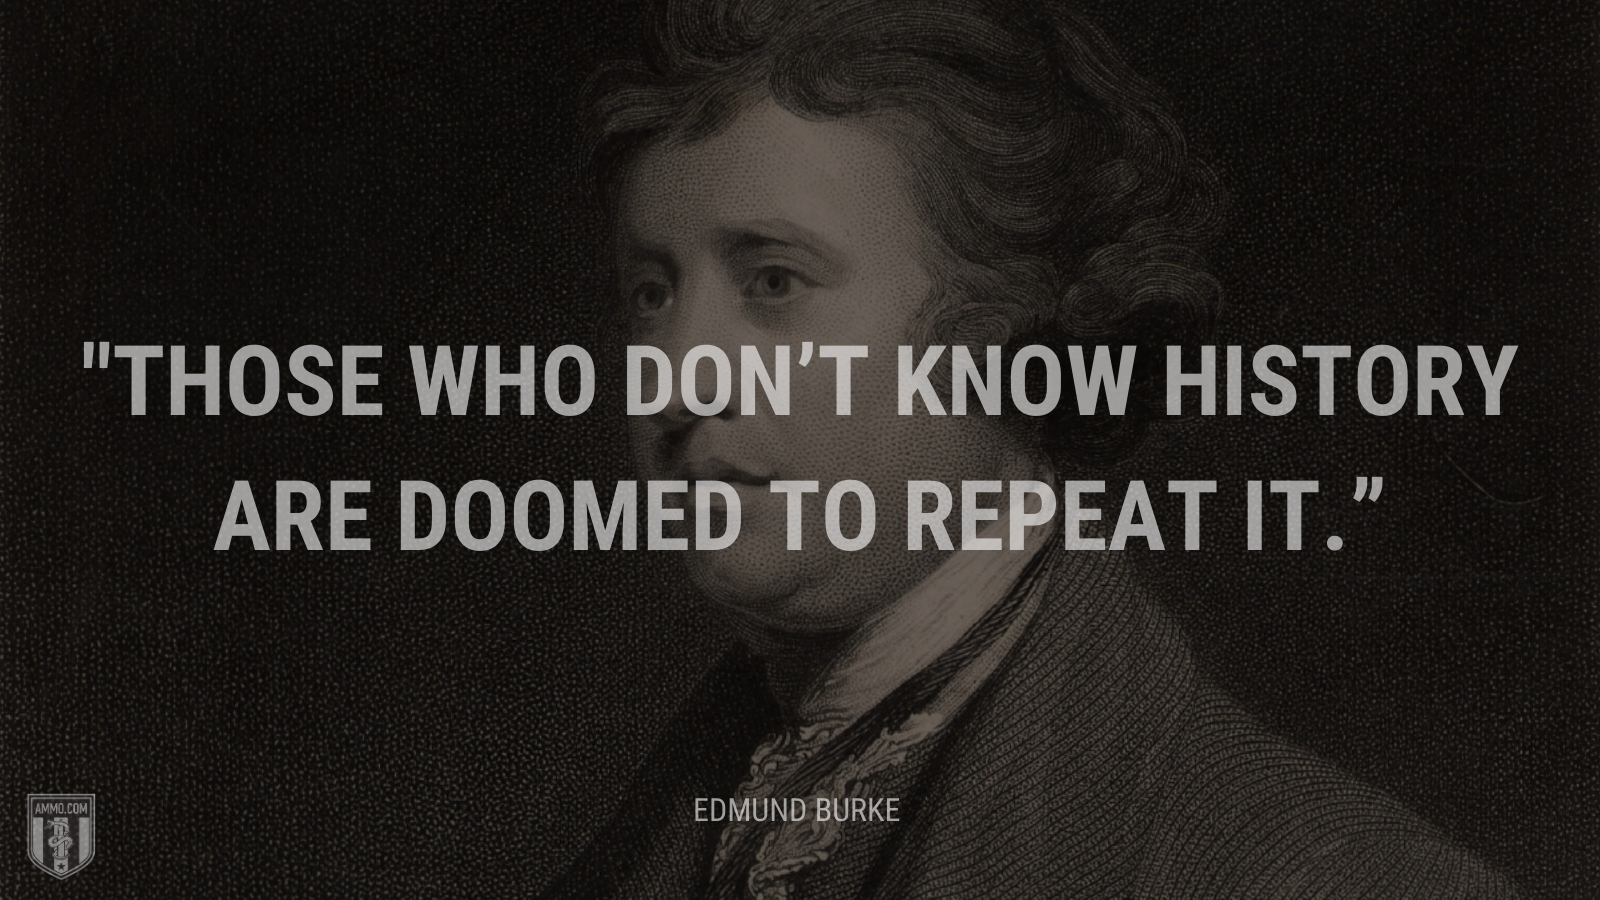 “Those who don’t know history are doomed to repeat it.” - Edmund Burke